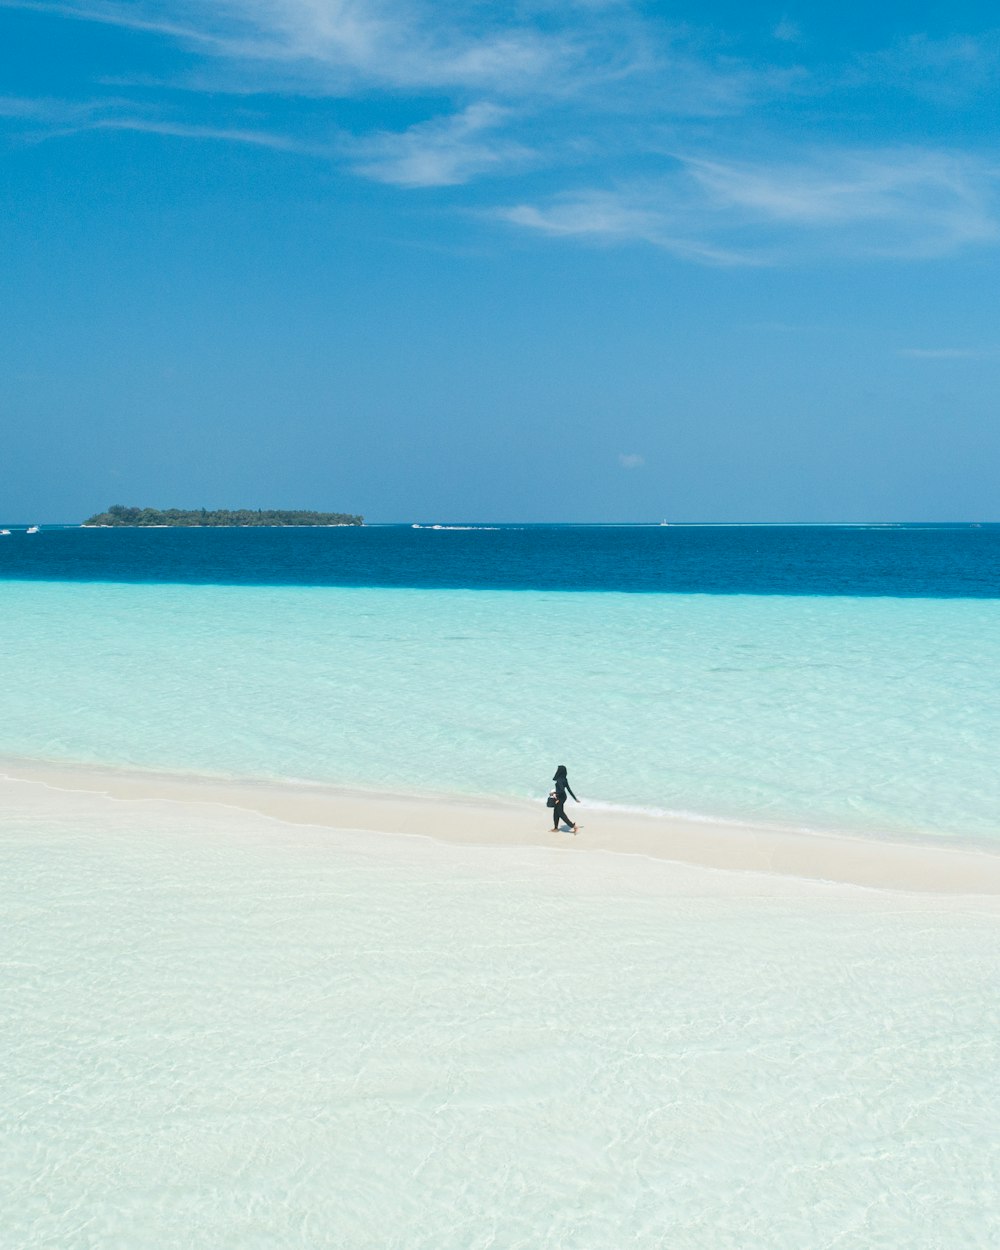 person walking on beach viewing island under blue and white sky